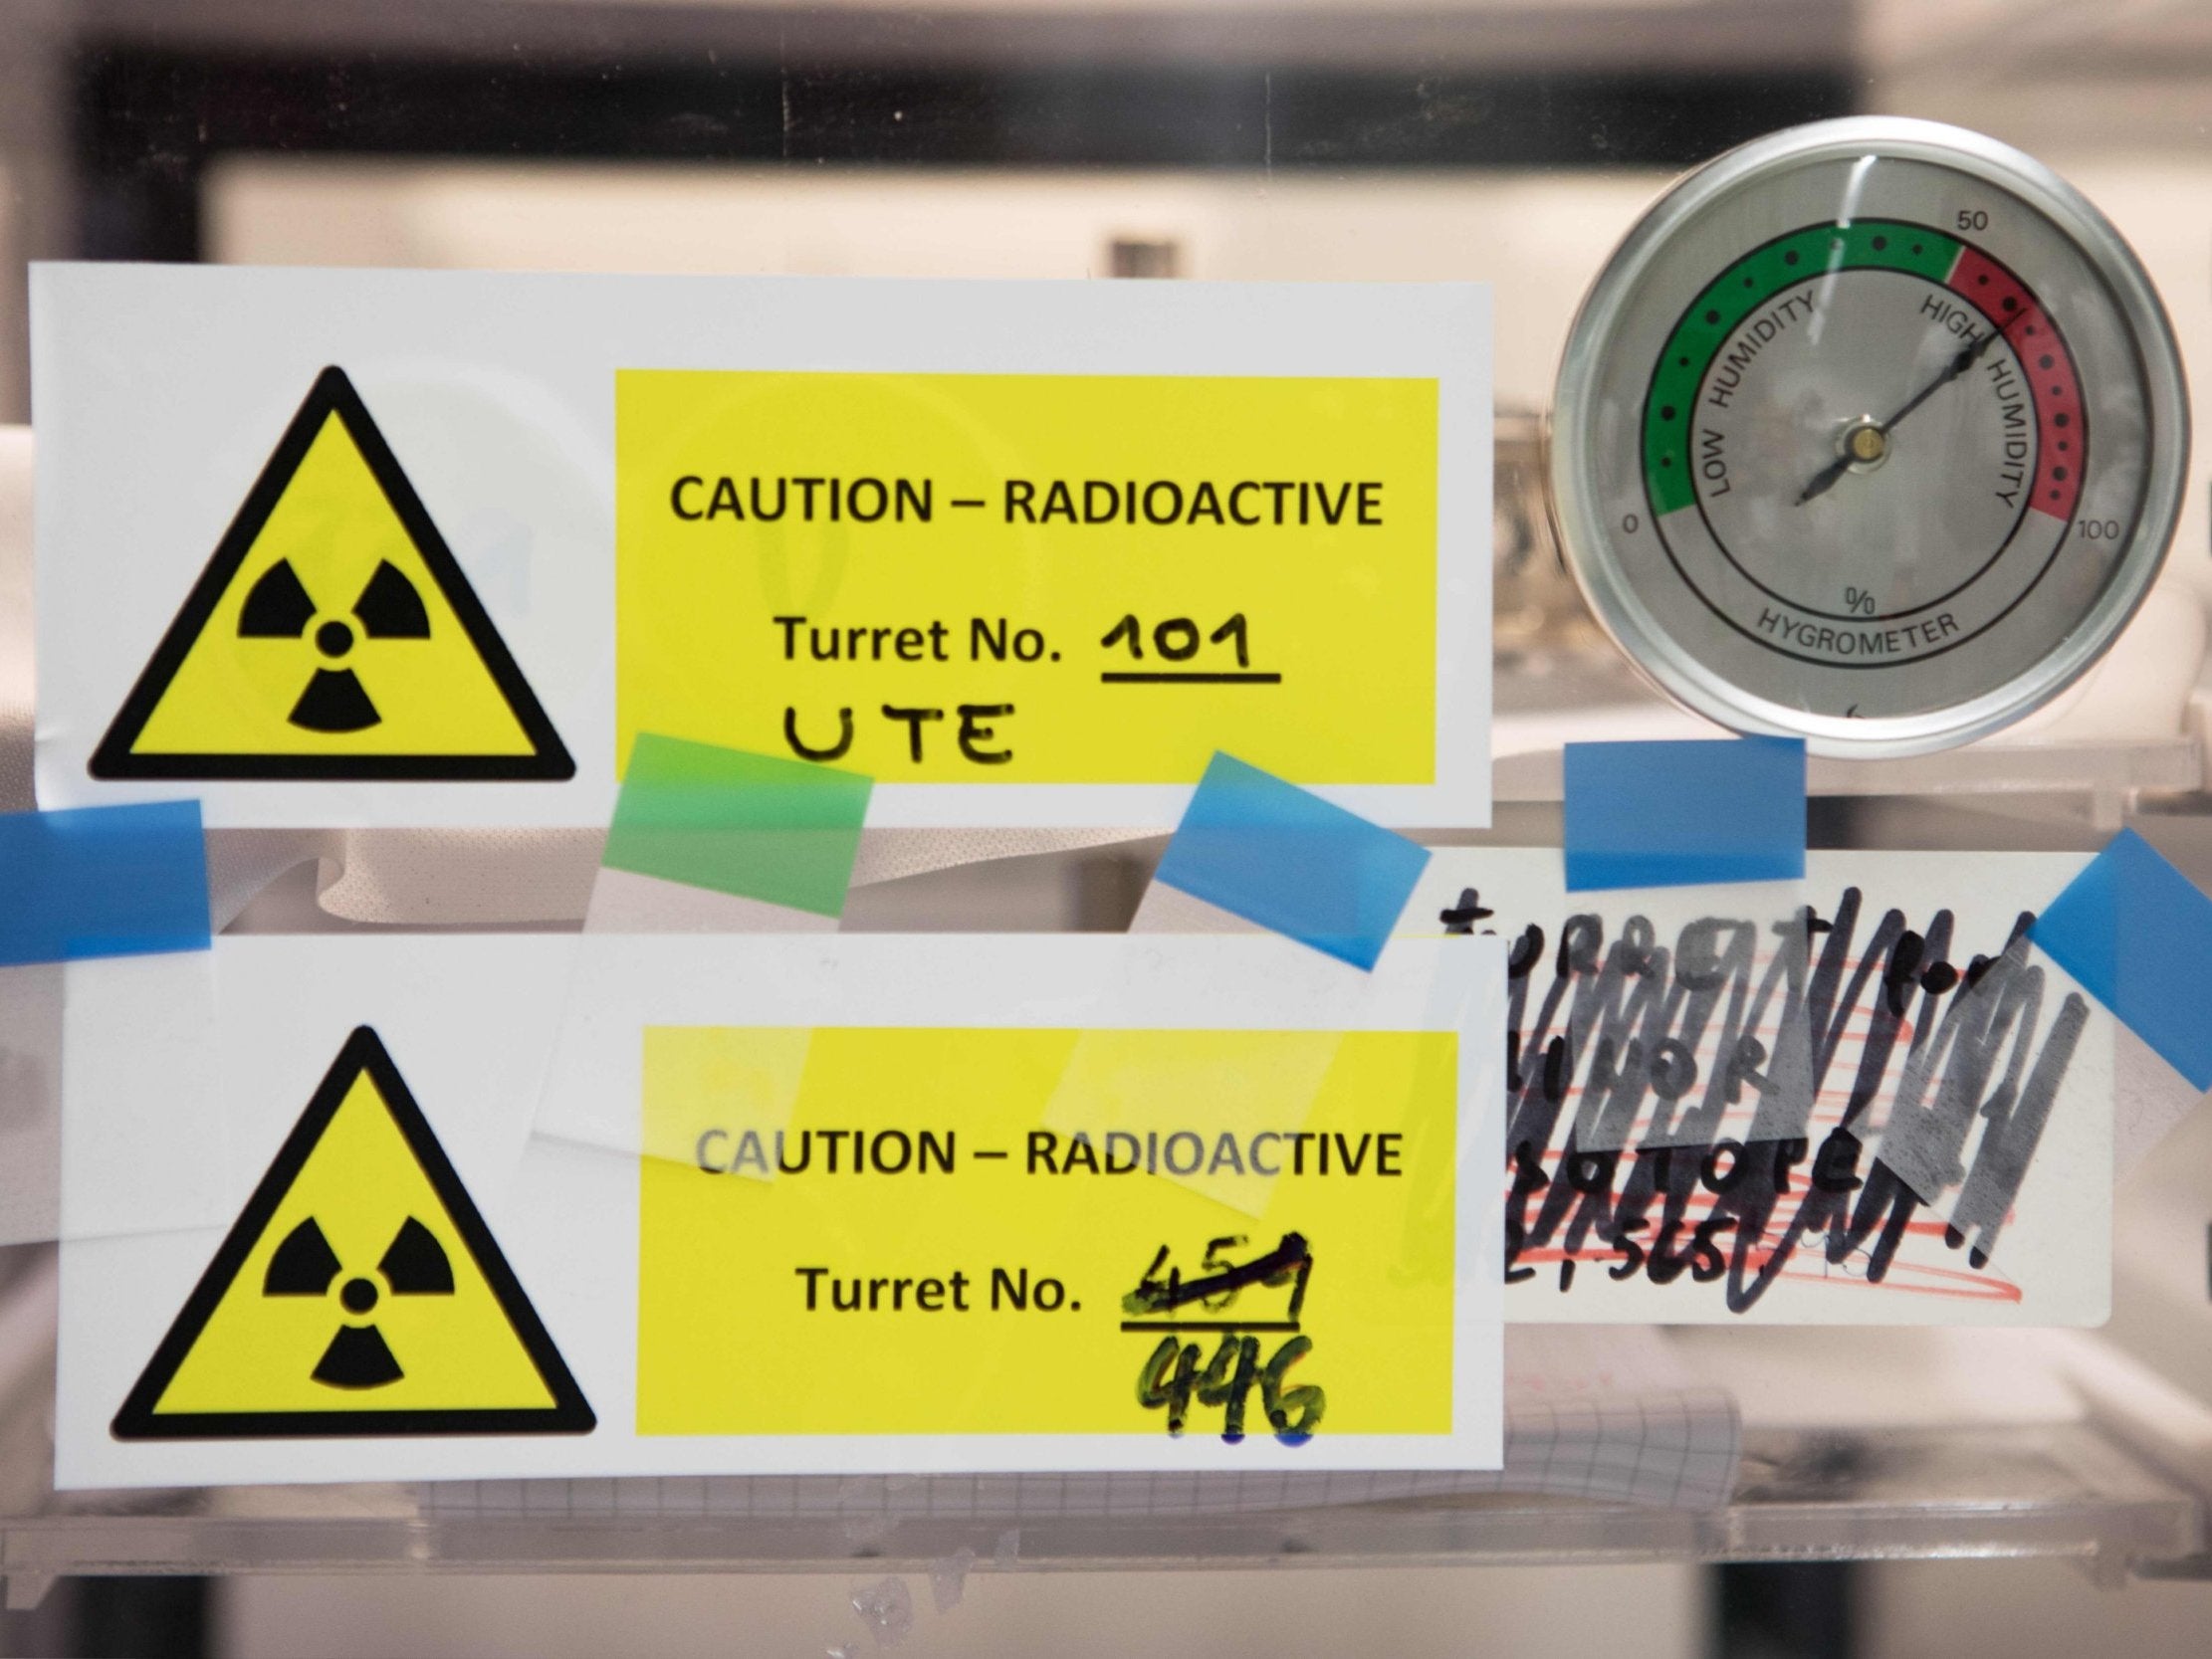 Radioactive material at the laboratories of the International Atomic Energy Agency in Seibersdorf, near Vienna